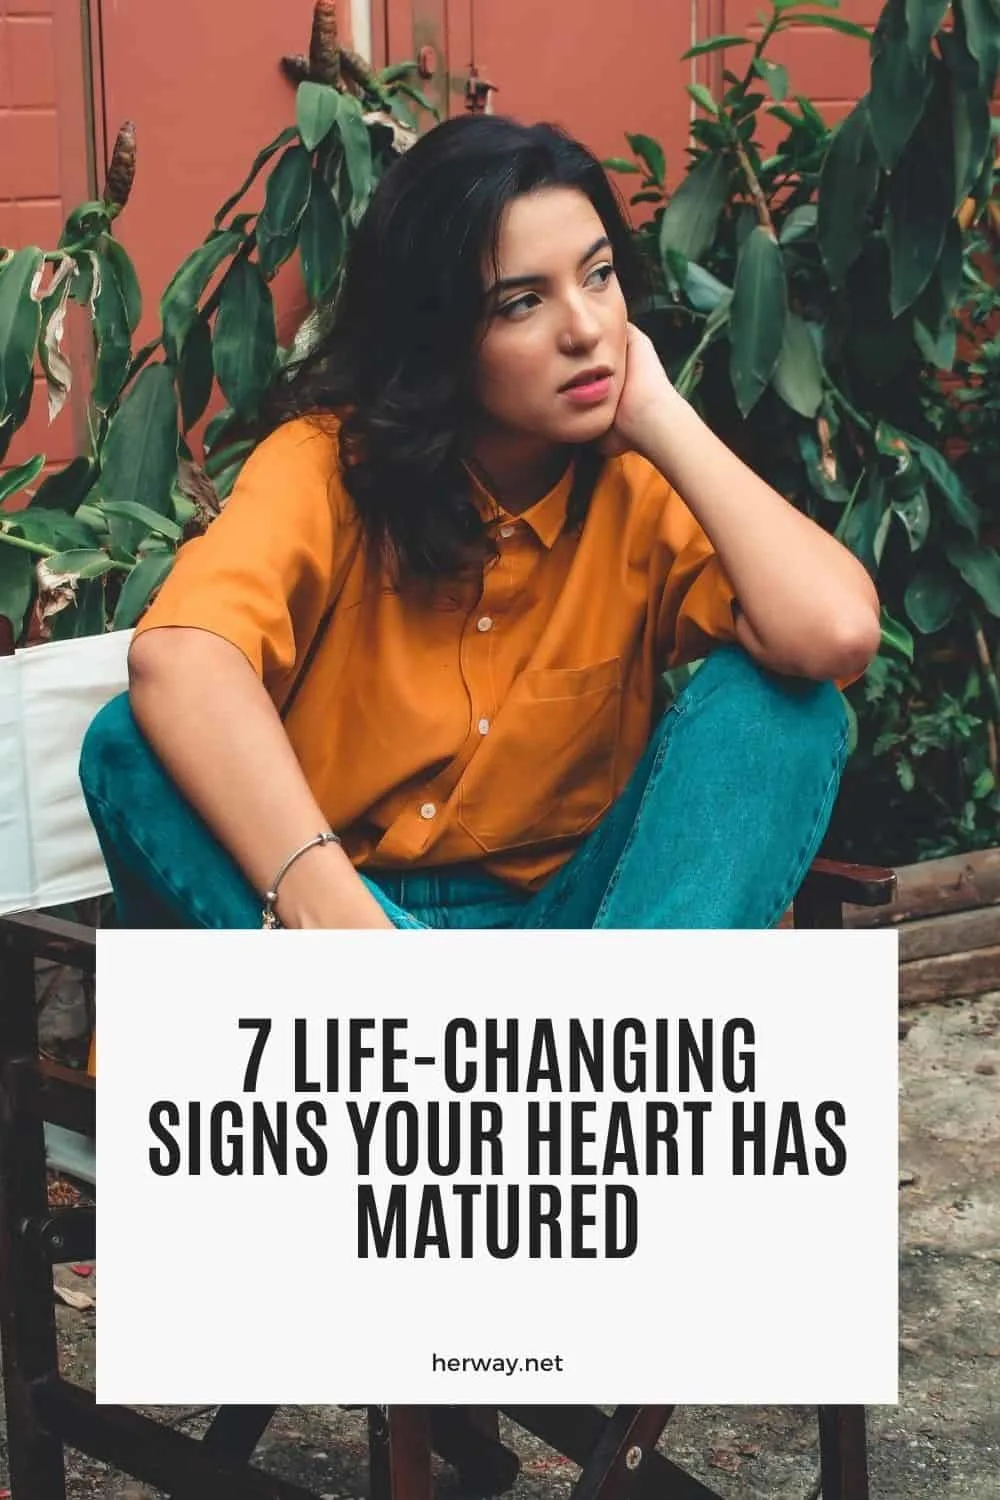 7 Life-Changing Signs Your Heart Has Matured